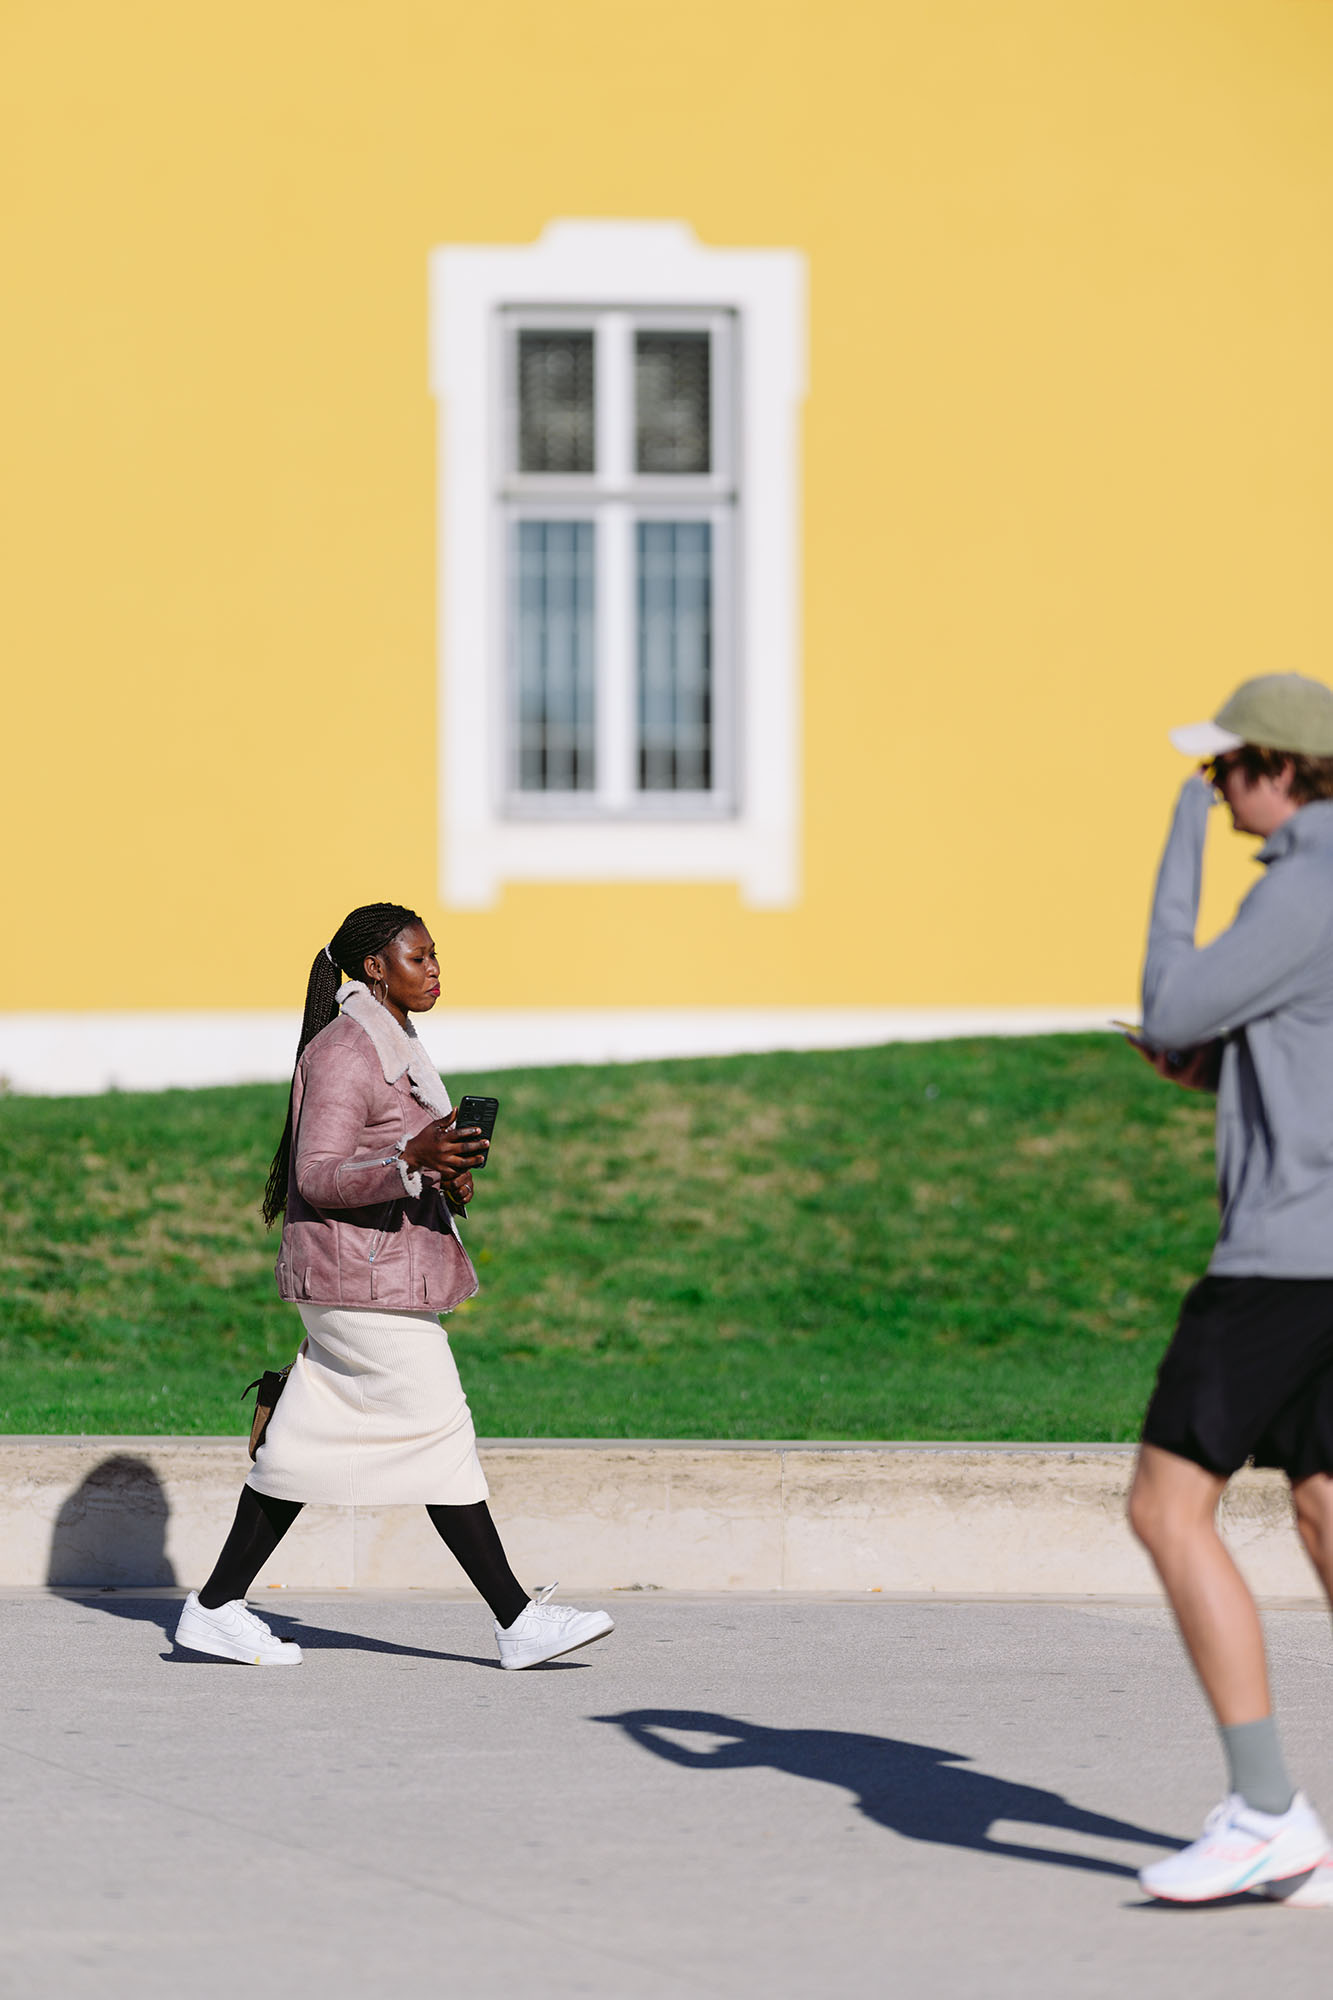 People walking in front of the yellow wall on a sunny day in Lisbon, Portugal